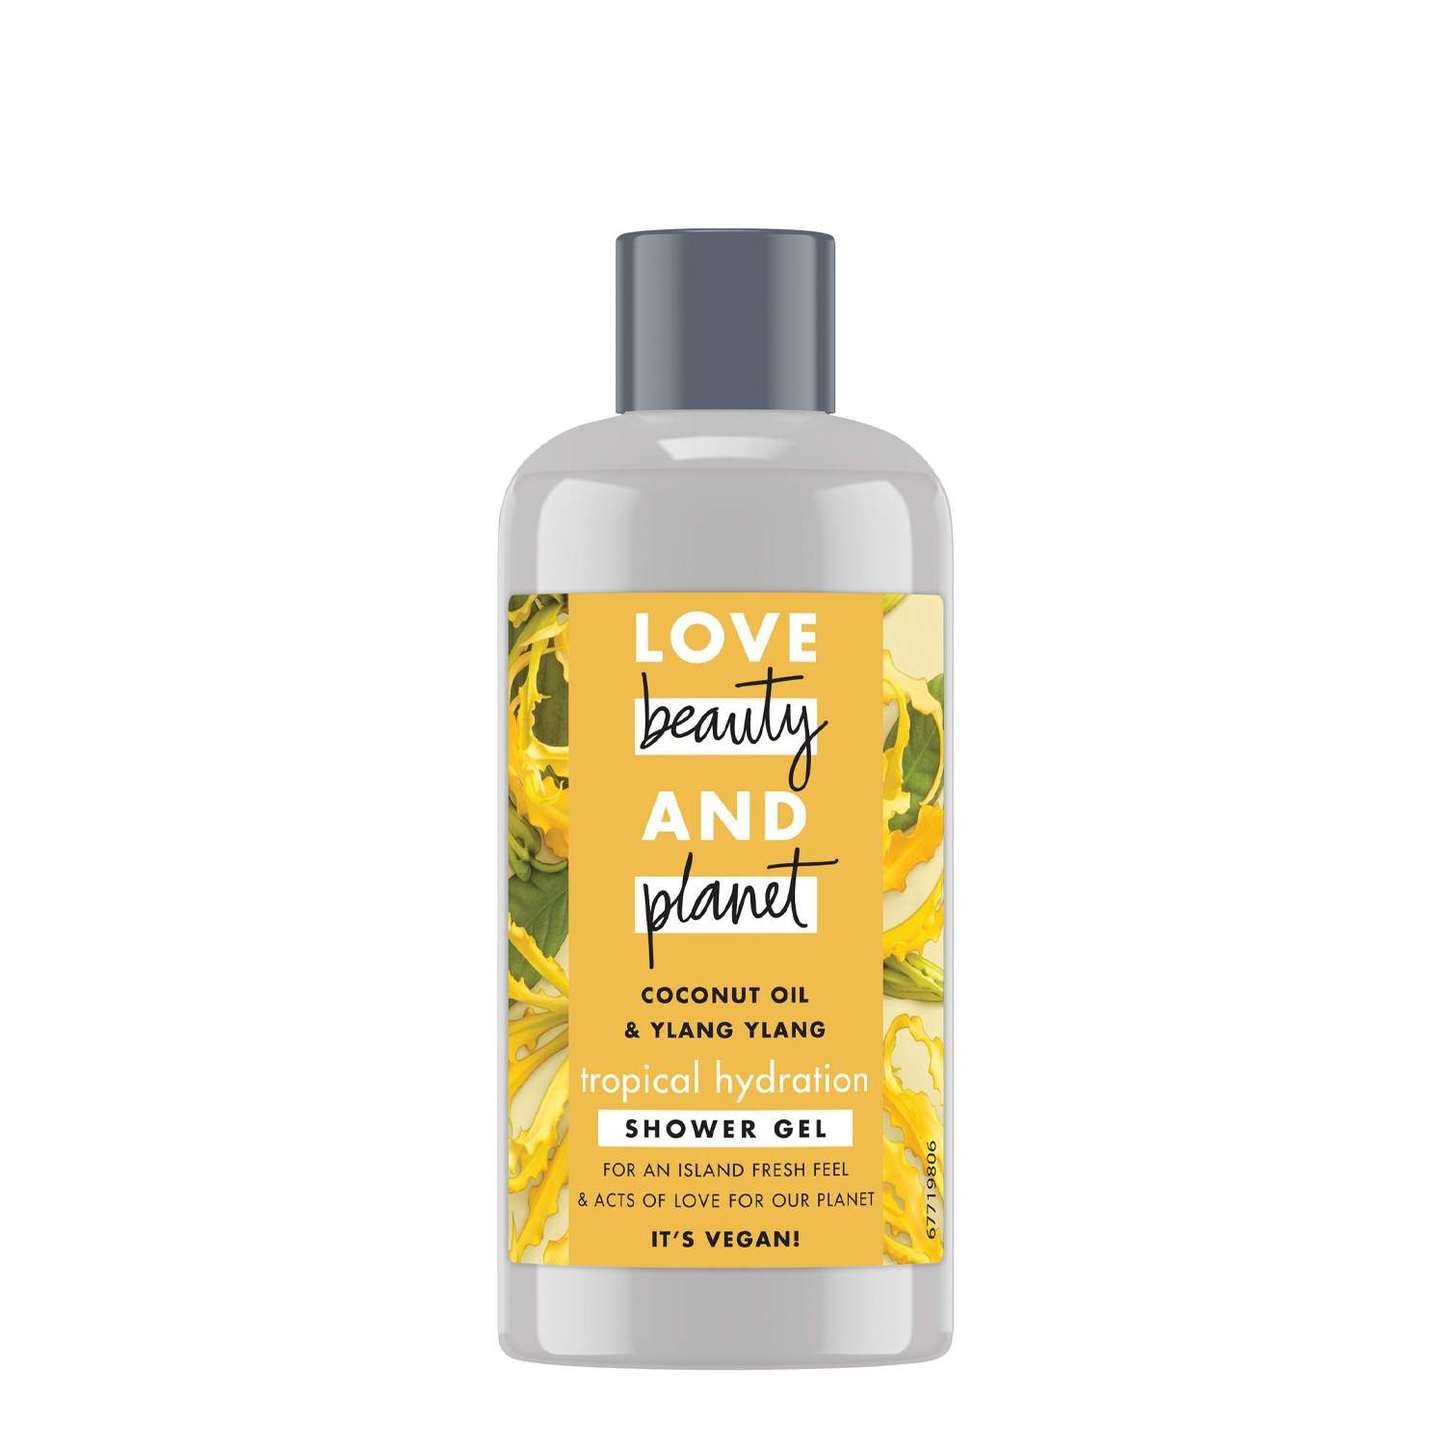 Love Beauty and Planet Tropical Hydration Coconut Oil & Ylang Ylang Shower Gel